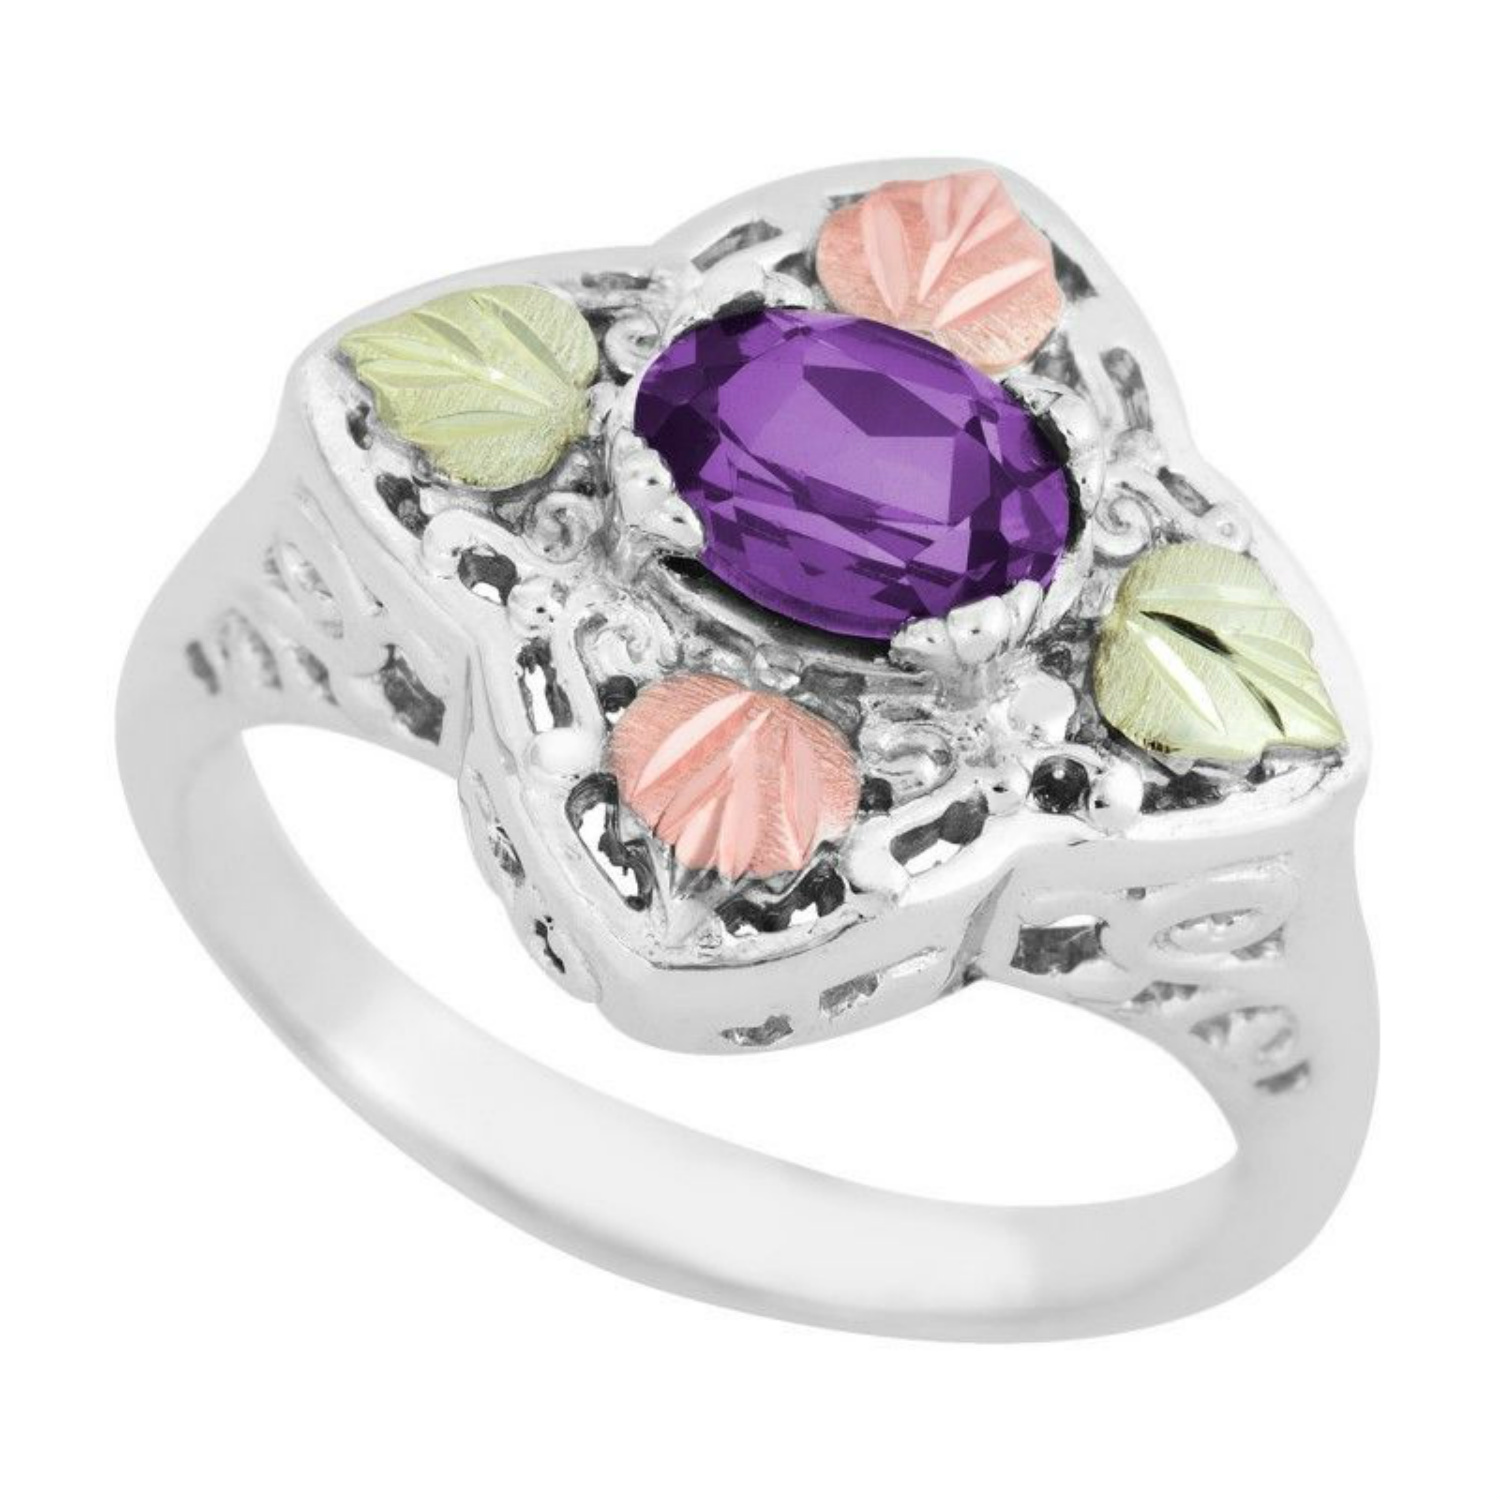 Created Birthstone Ring, Rhodium Plated Sterling Silver, 12k Green and Rose Gold Black Hills Silver Motif.  